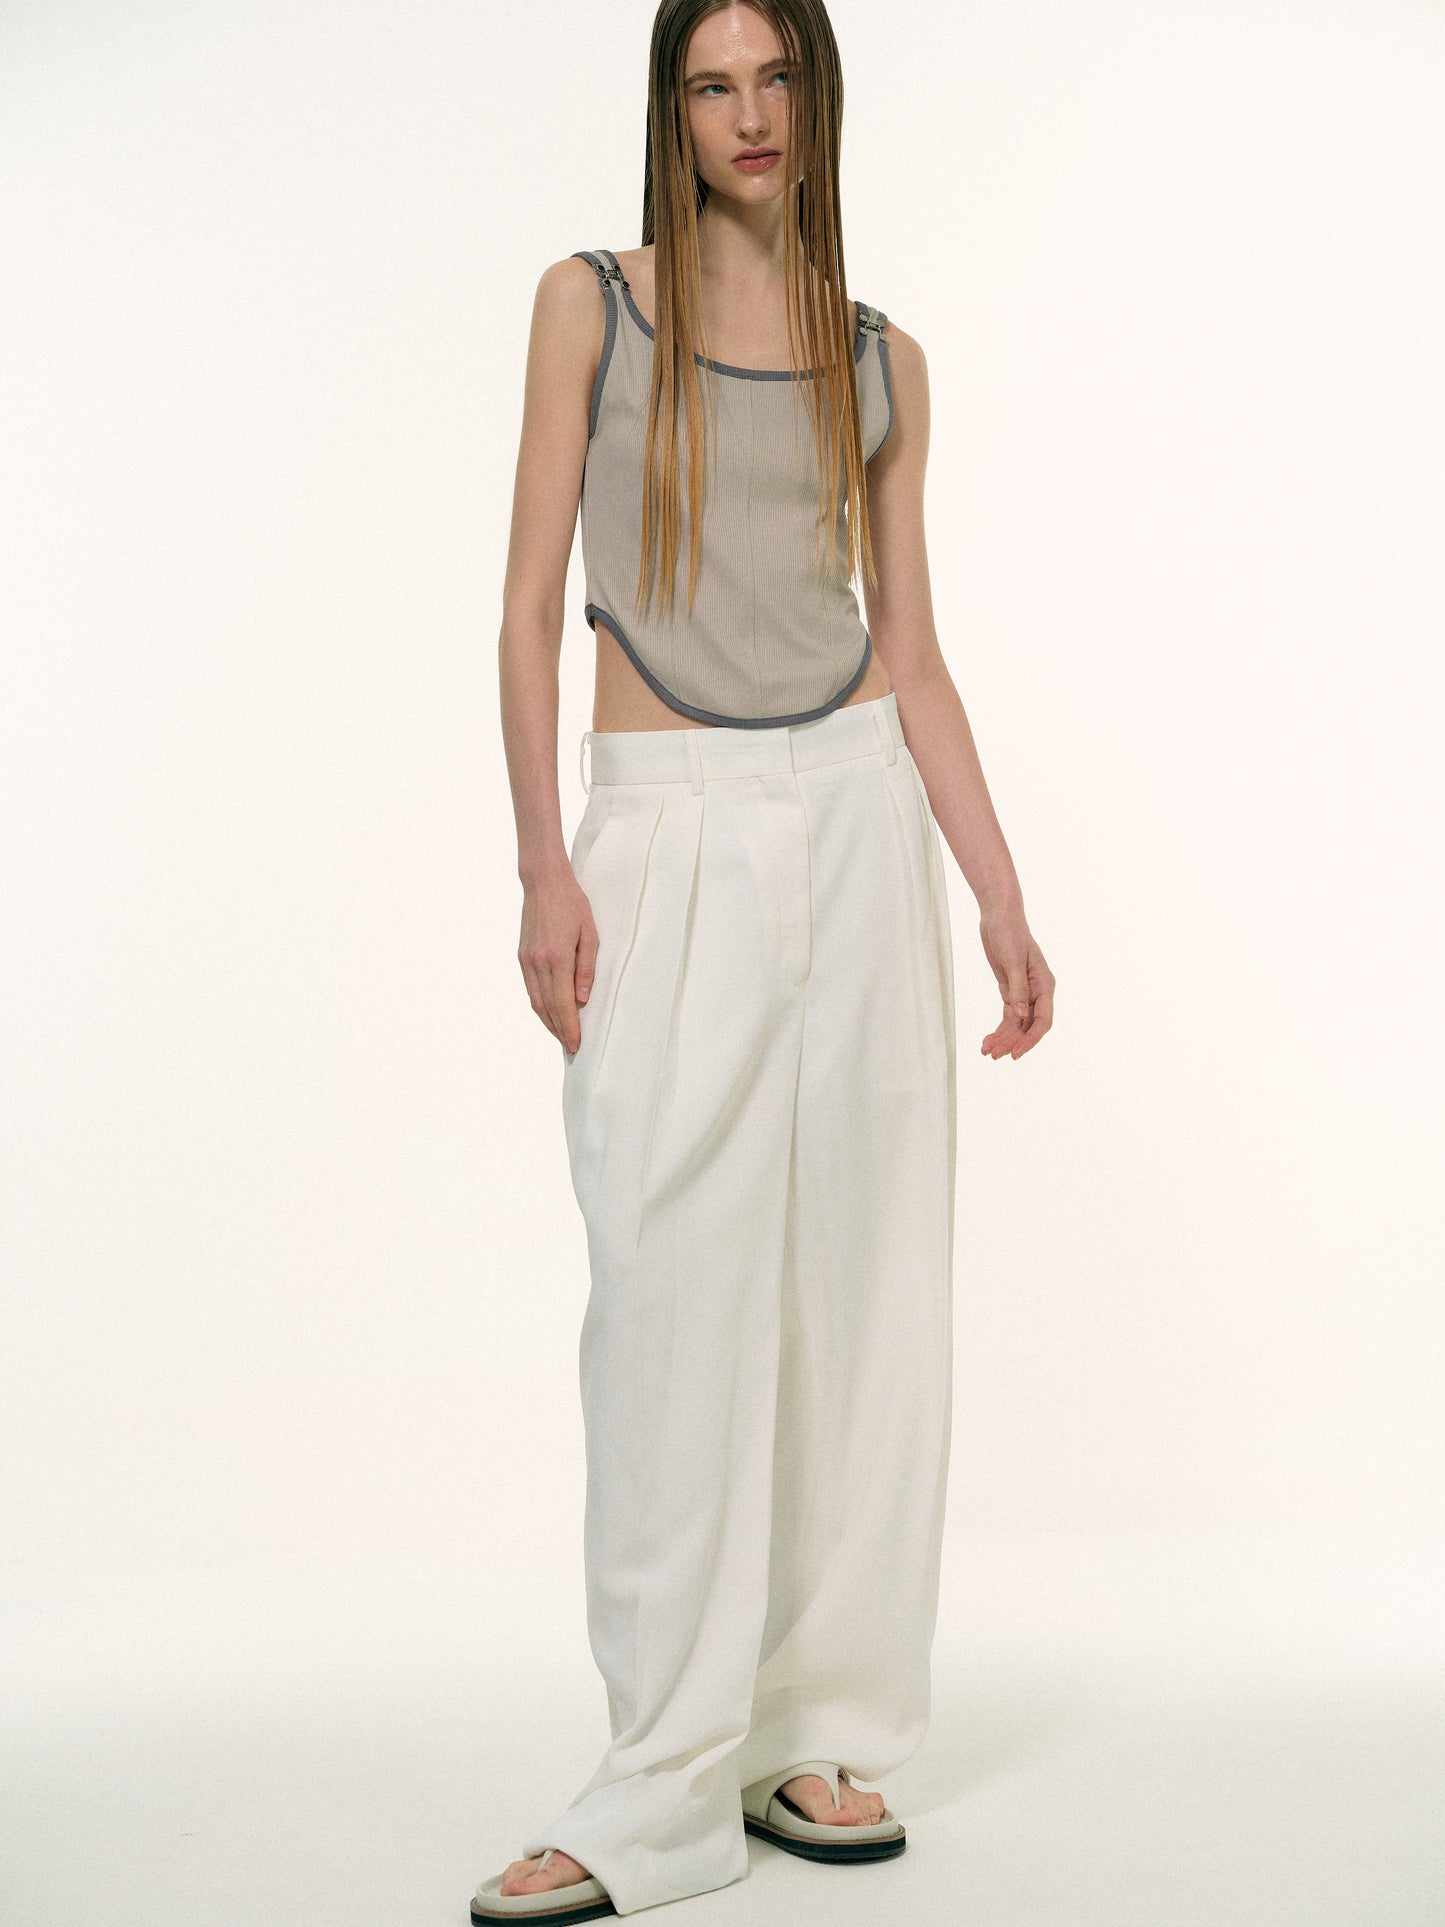 Low-Rise Pleated Trousers, White